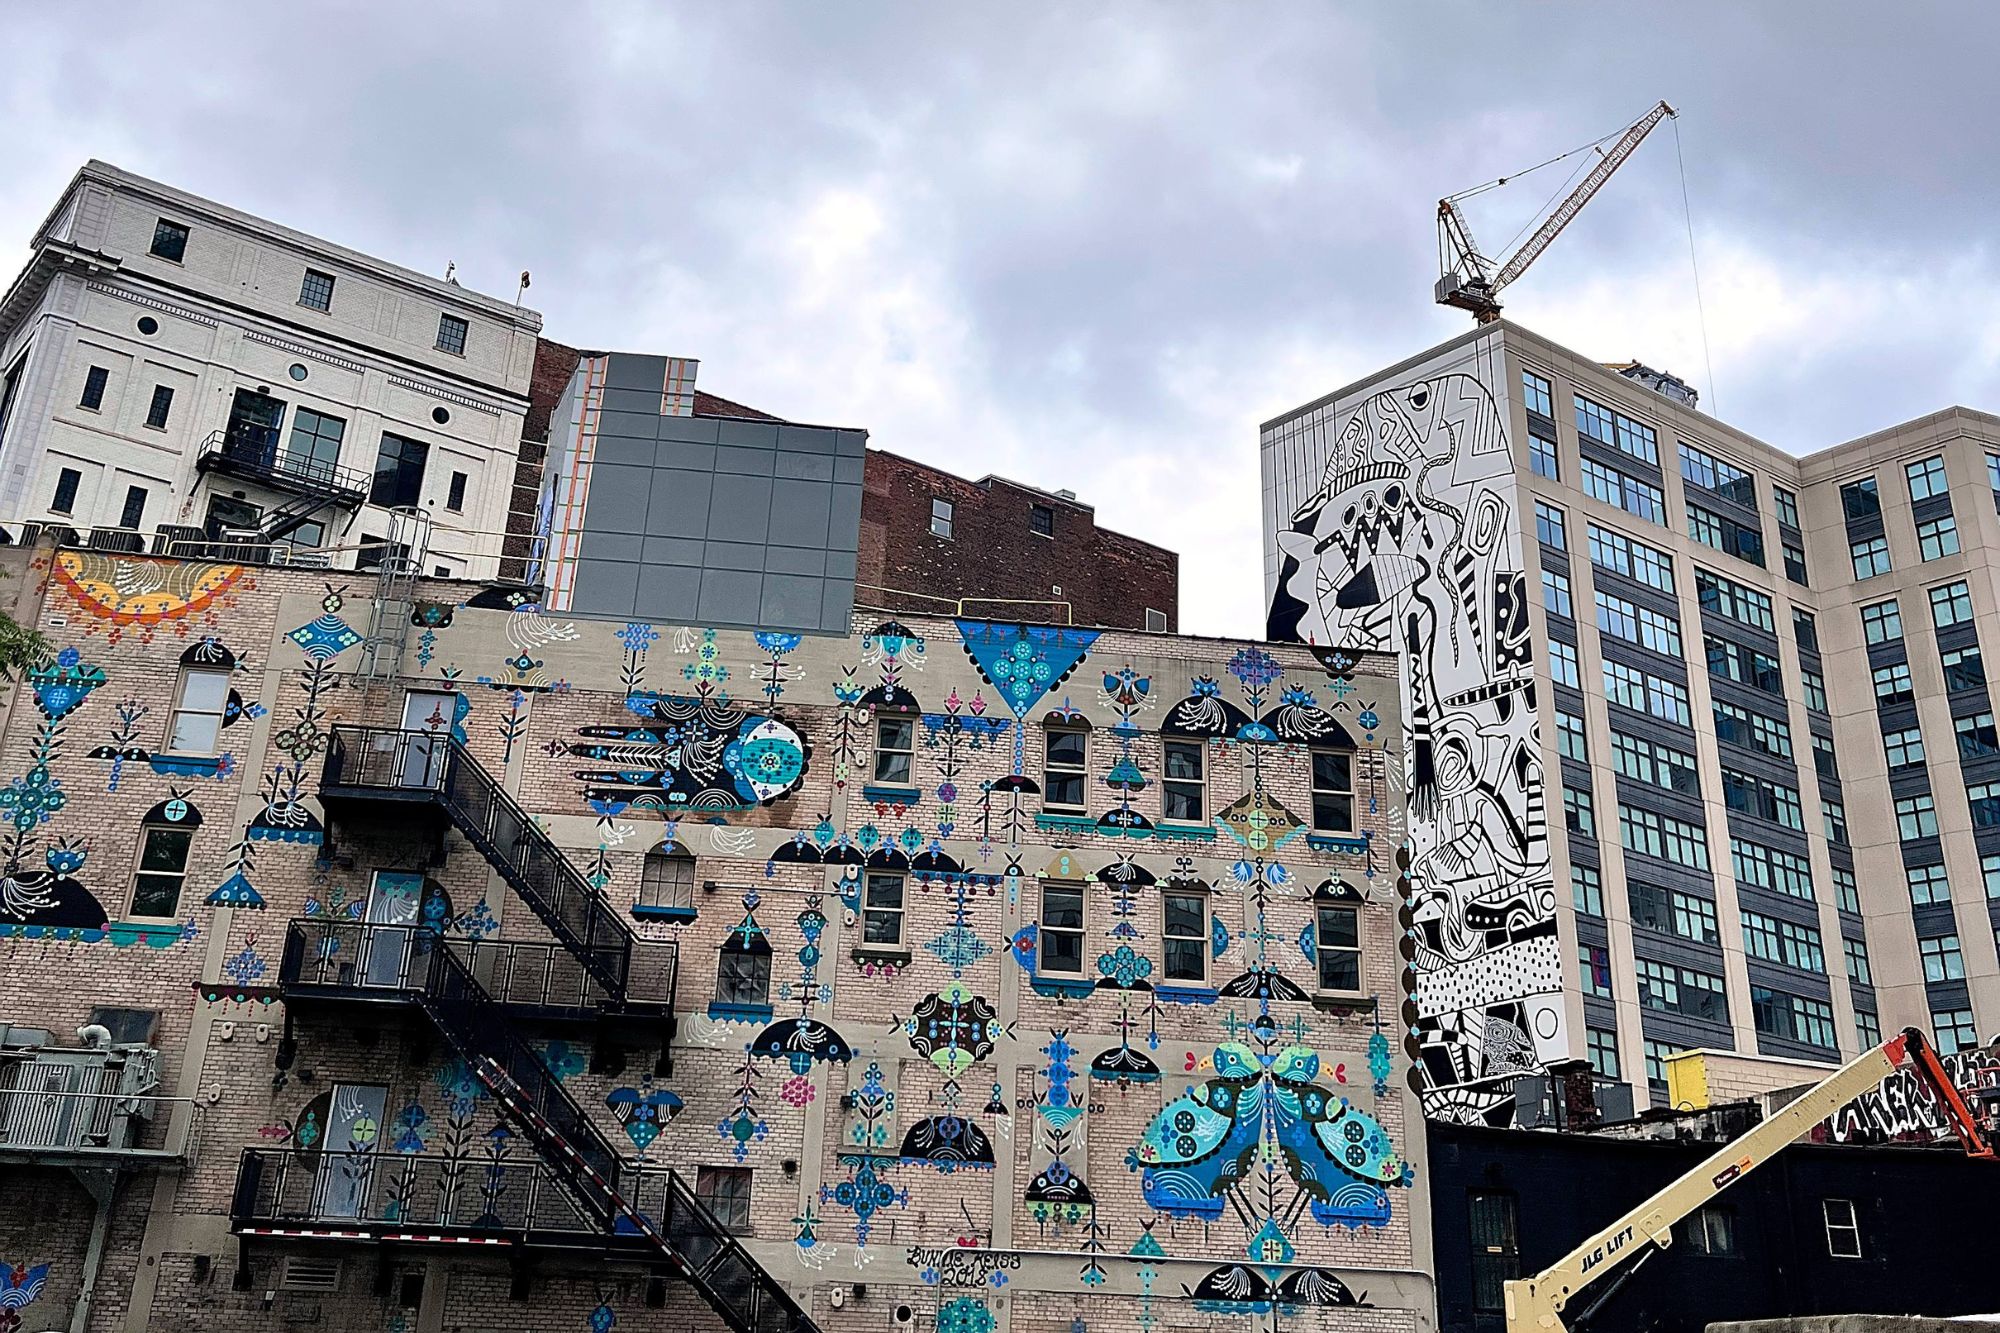 Street art on the side of a building in Detroit